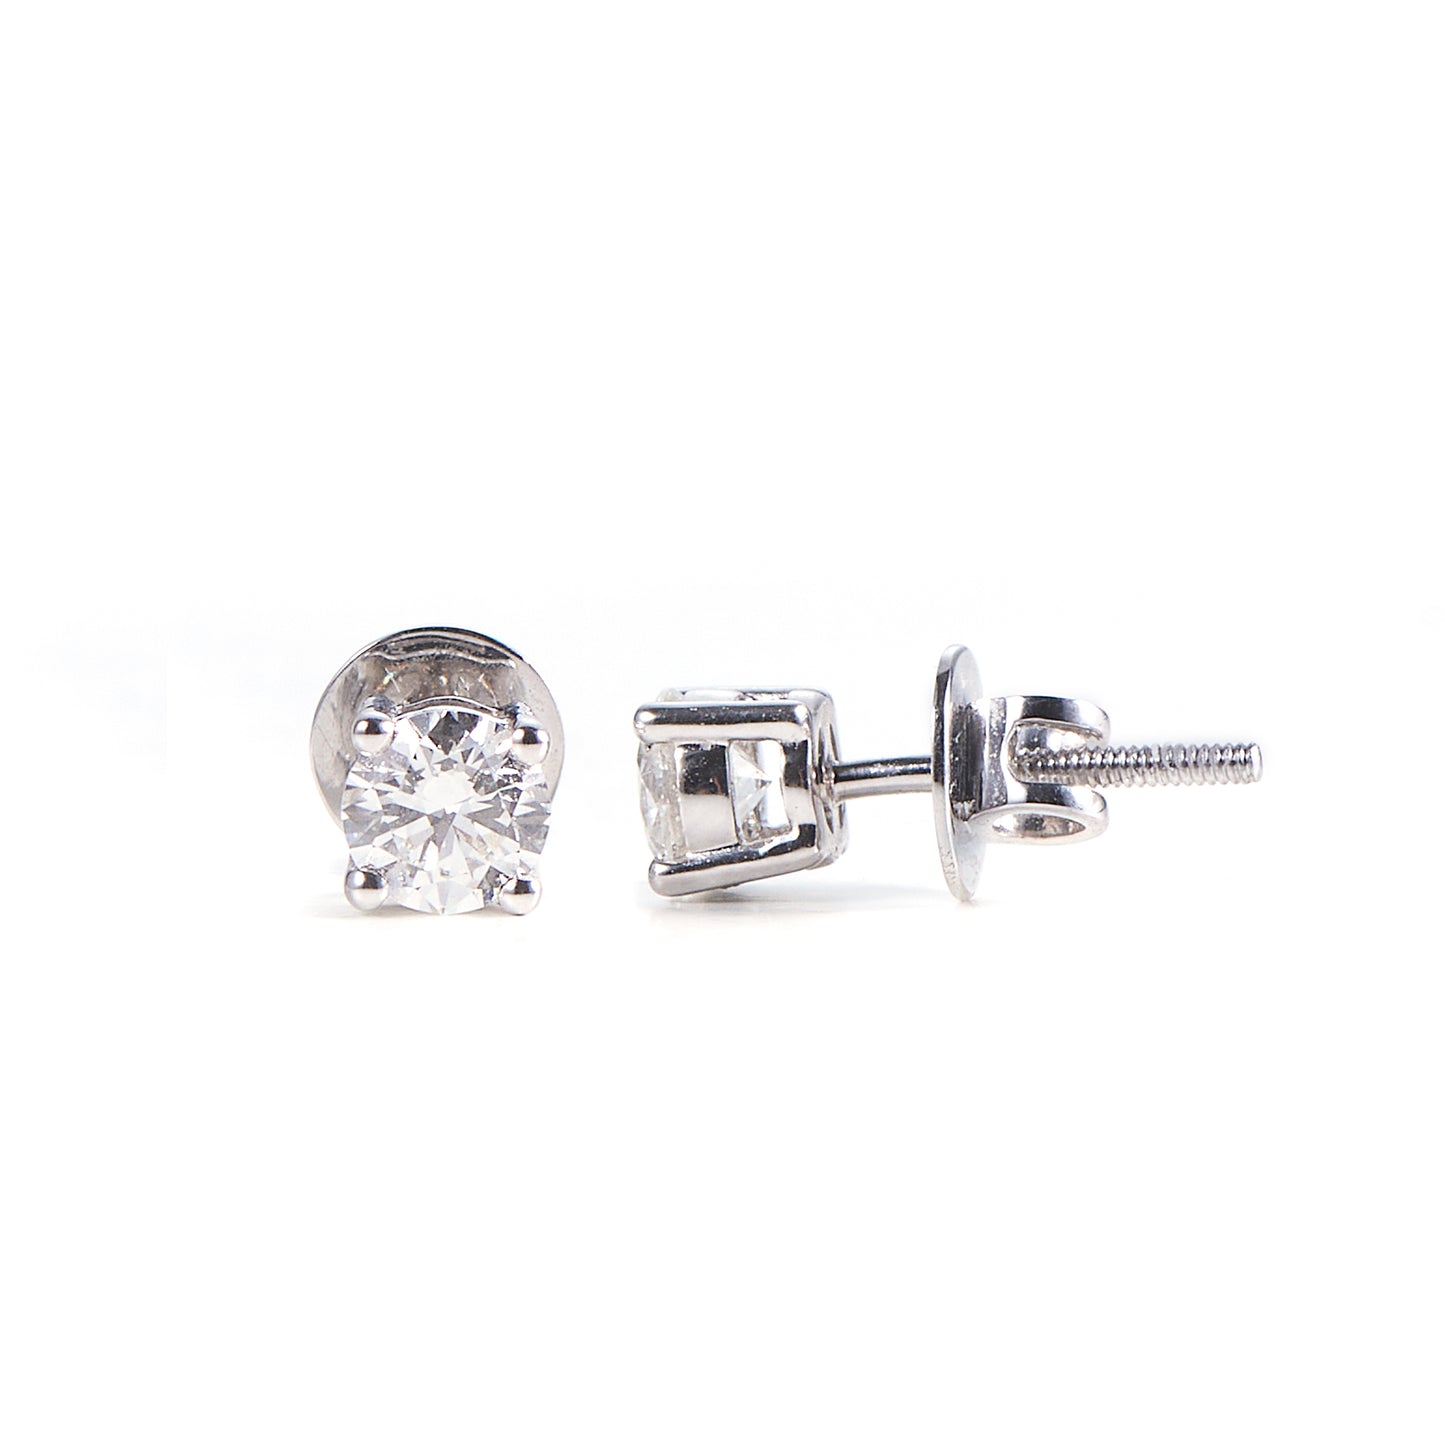 SOLITAIRE STUDS WITH 0.20 crts Diamonds